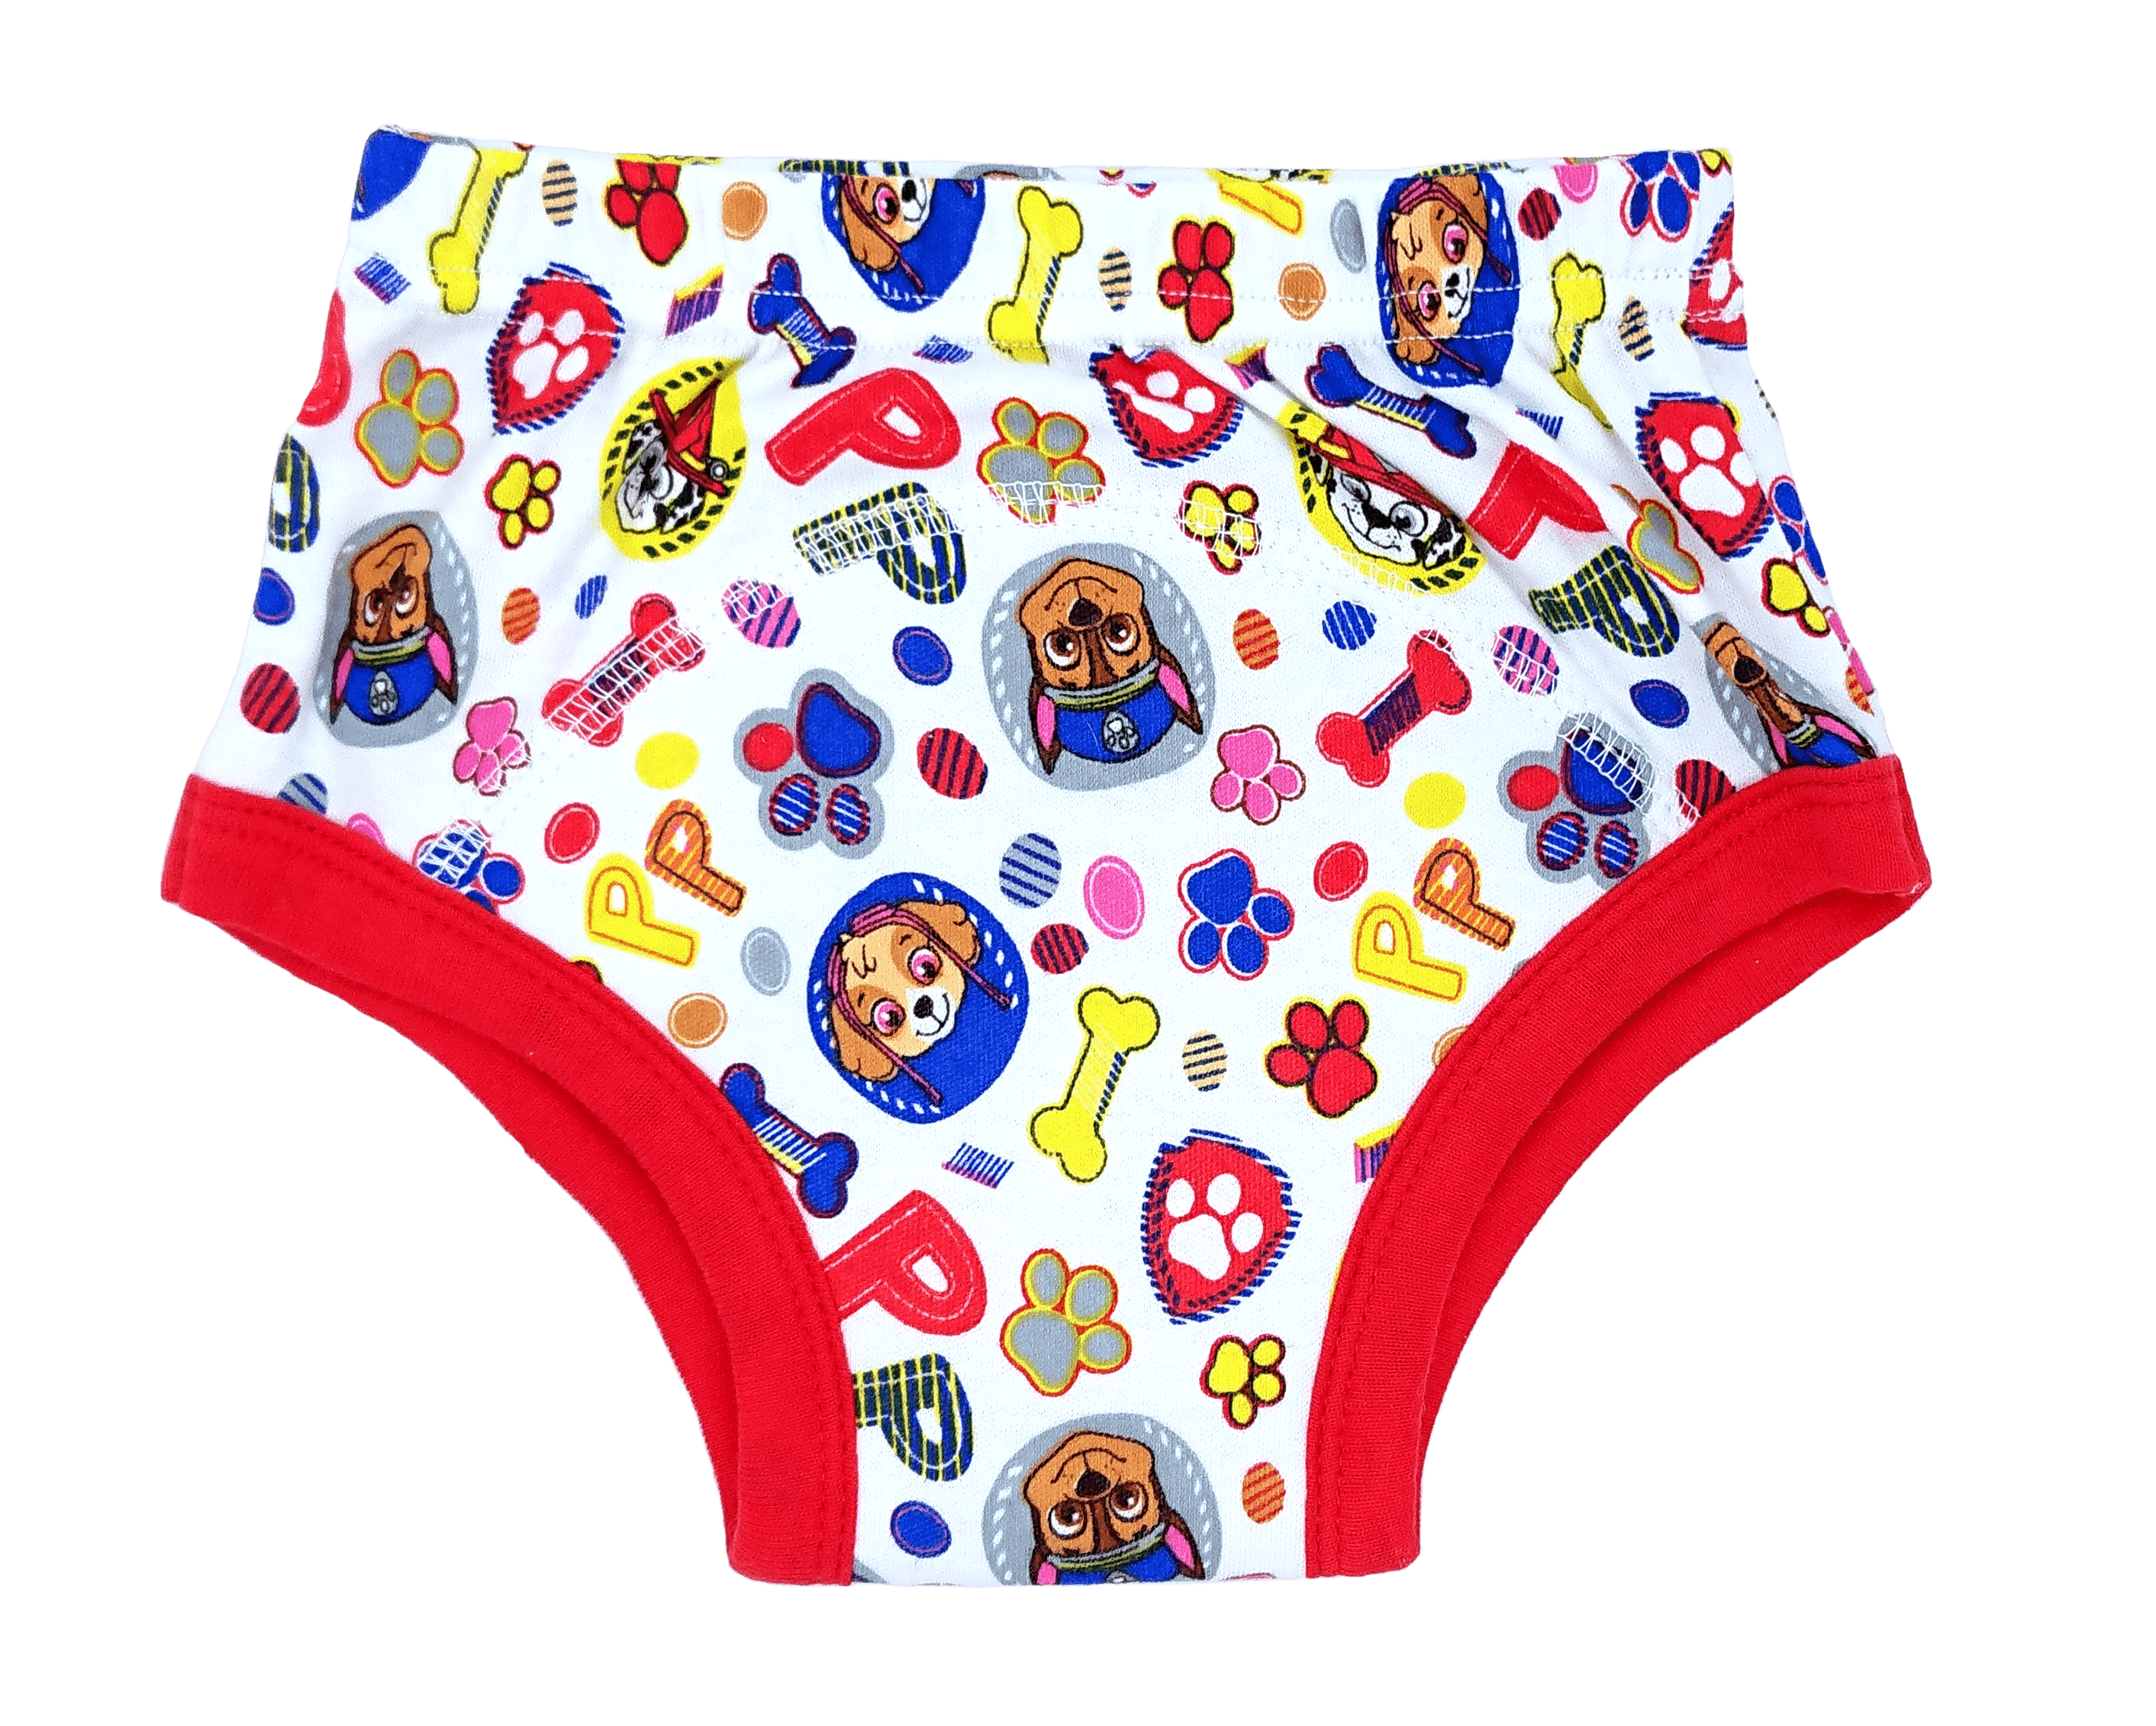 https://images.bauerhosting.com/affiliates/sites/12/motherandbaby/legacy/root/paw-patrol-training-pants.png?ar=16%3A9&fit=crop&crop=top&auto=format&w=undefined&q=80